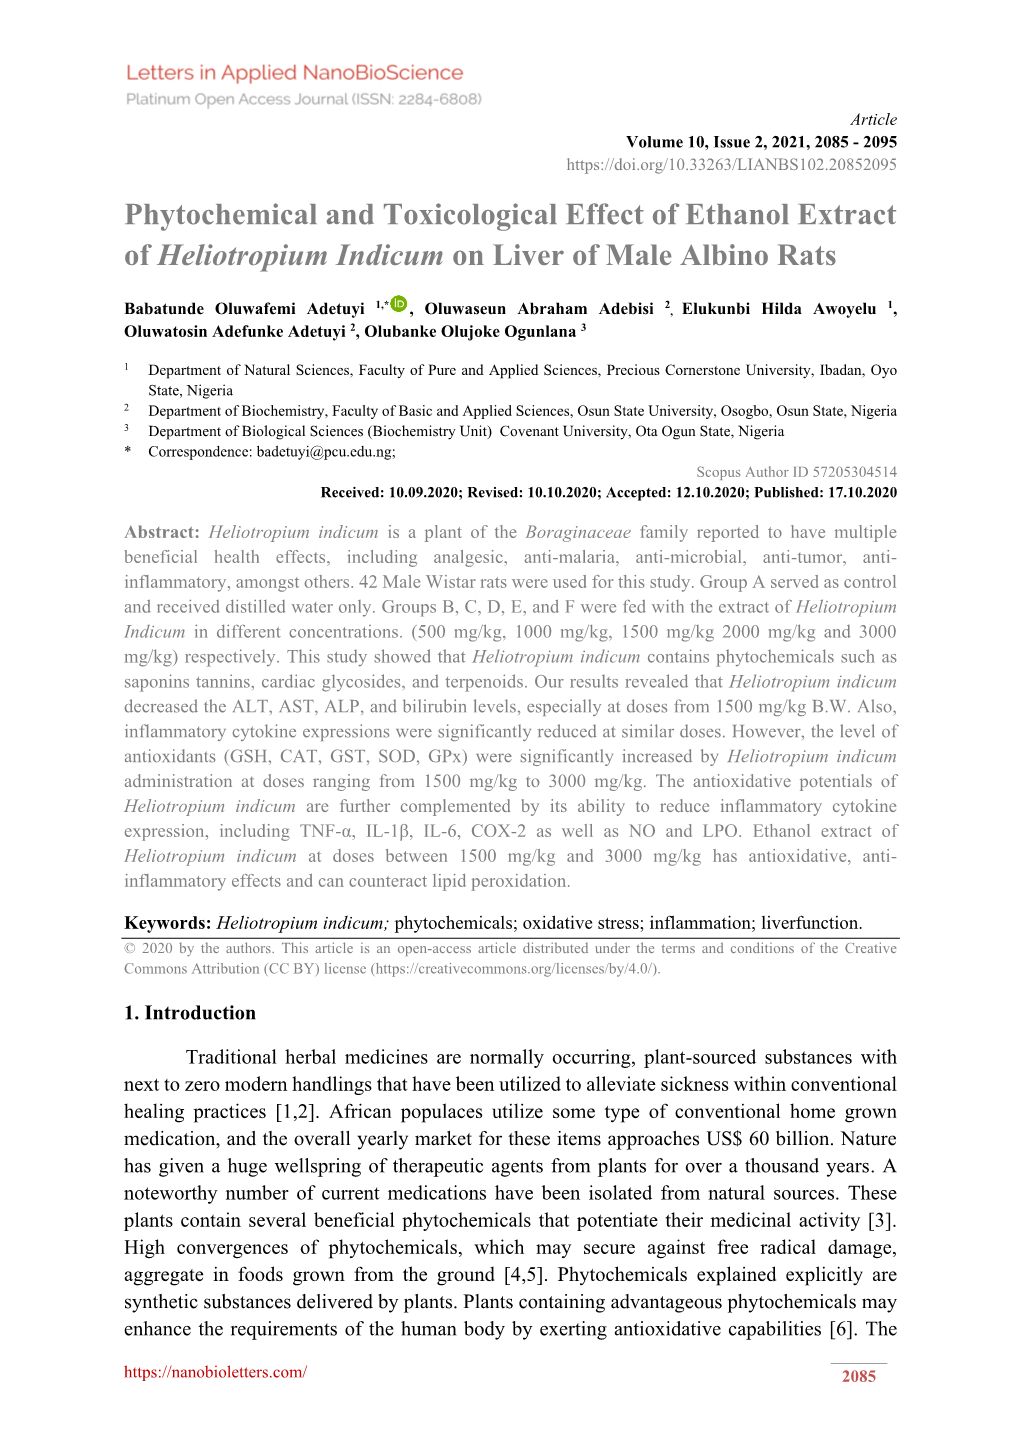 Phytochemical and Toxicological Effect of Ethanol Extract of Heliotropium Indicum on Liver of Male Albino Rats